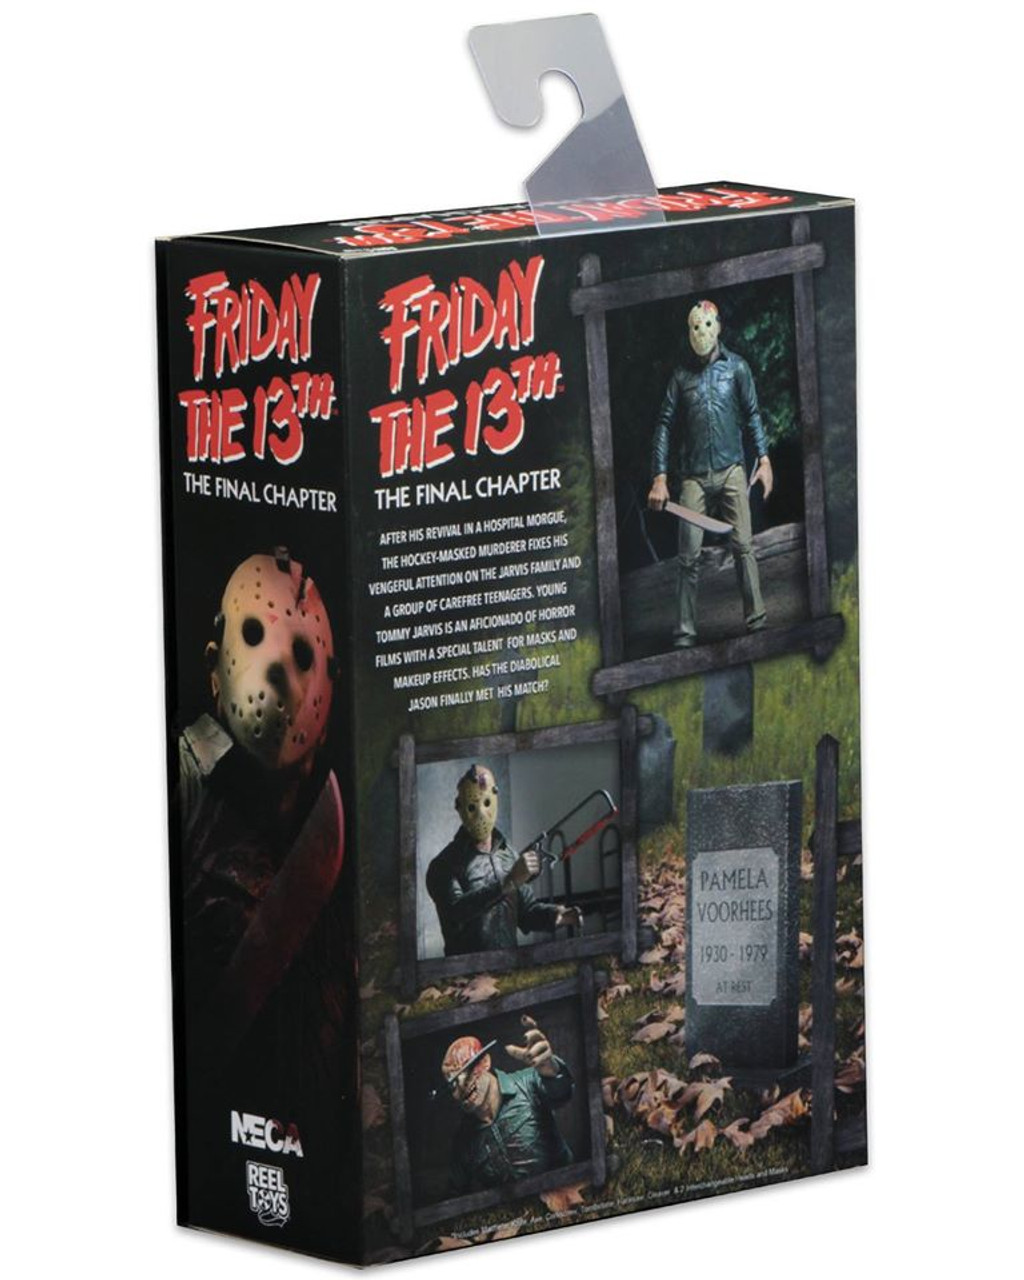 NECA Jason Friday the 13th Action Figures Jason Voorhees Horror